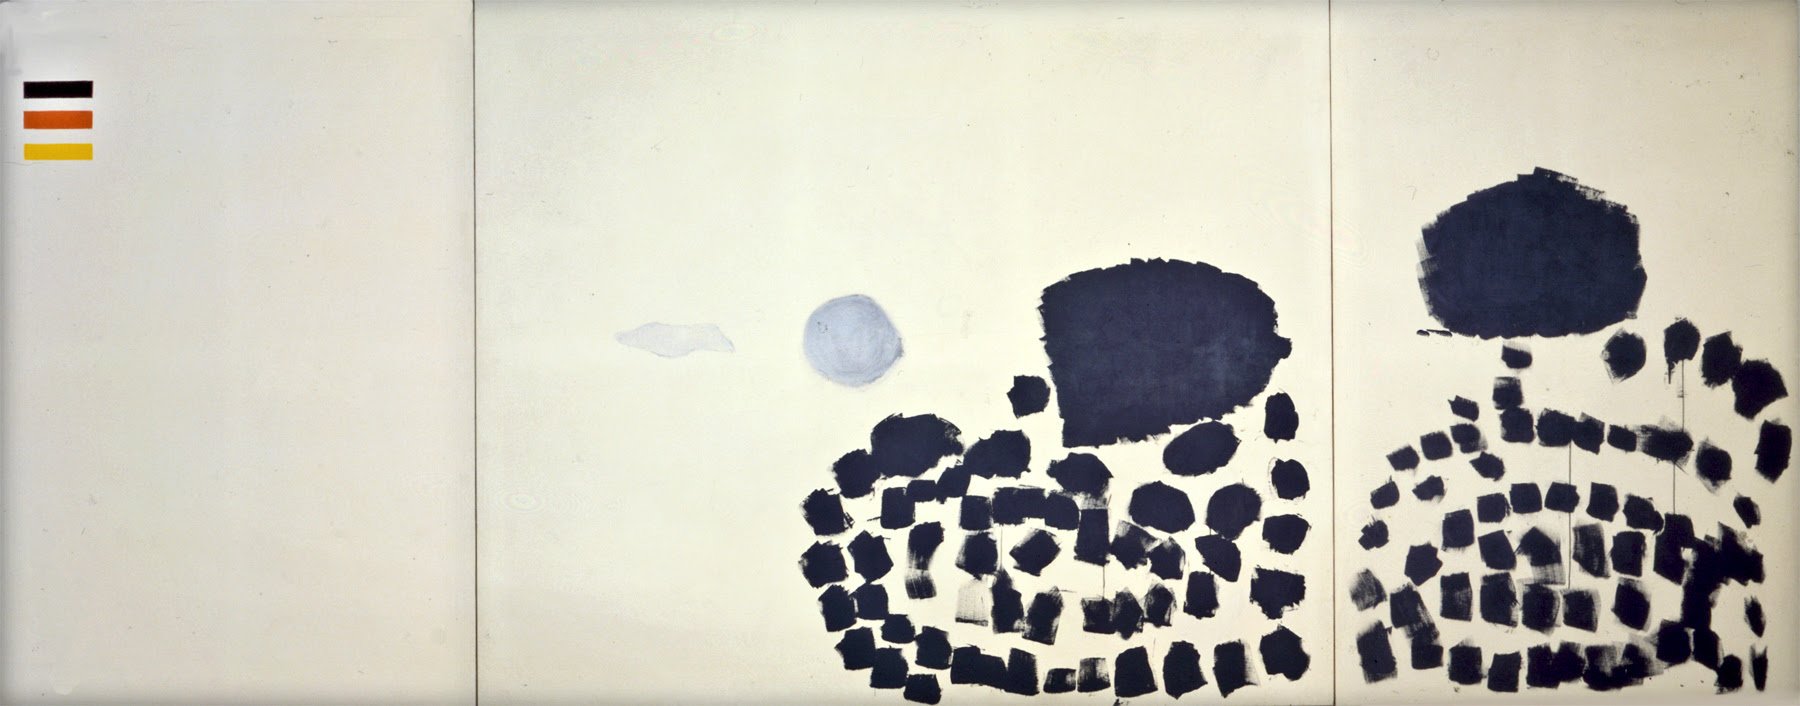  Adolph Gottlieb  Triptych  1971 acrylic on canvas 90 x 228 inches overall, 90 x 60 in., 90 x 108 in., 90 x 60 in 